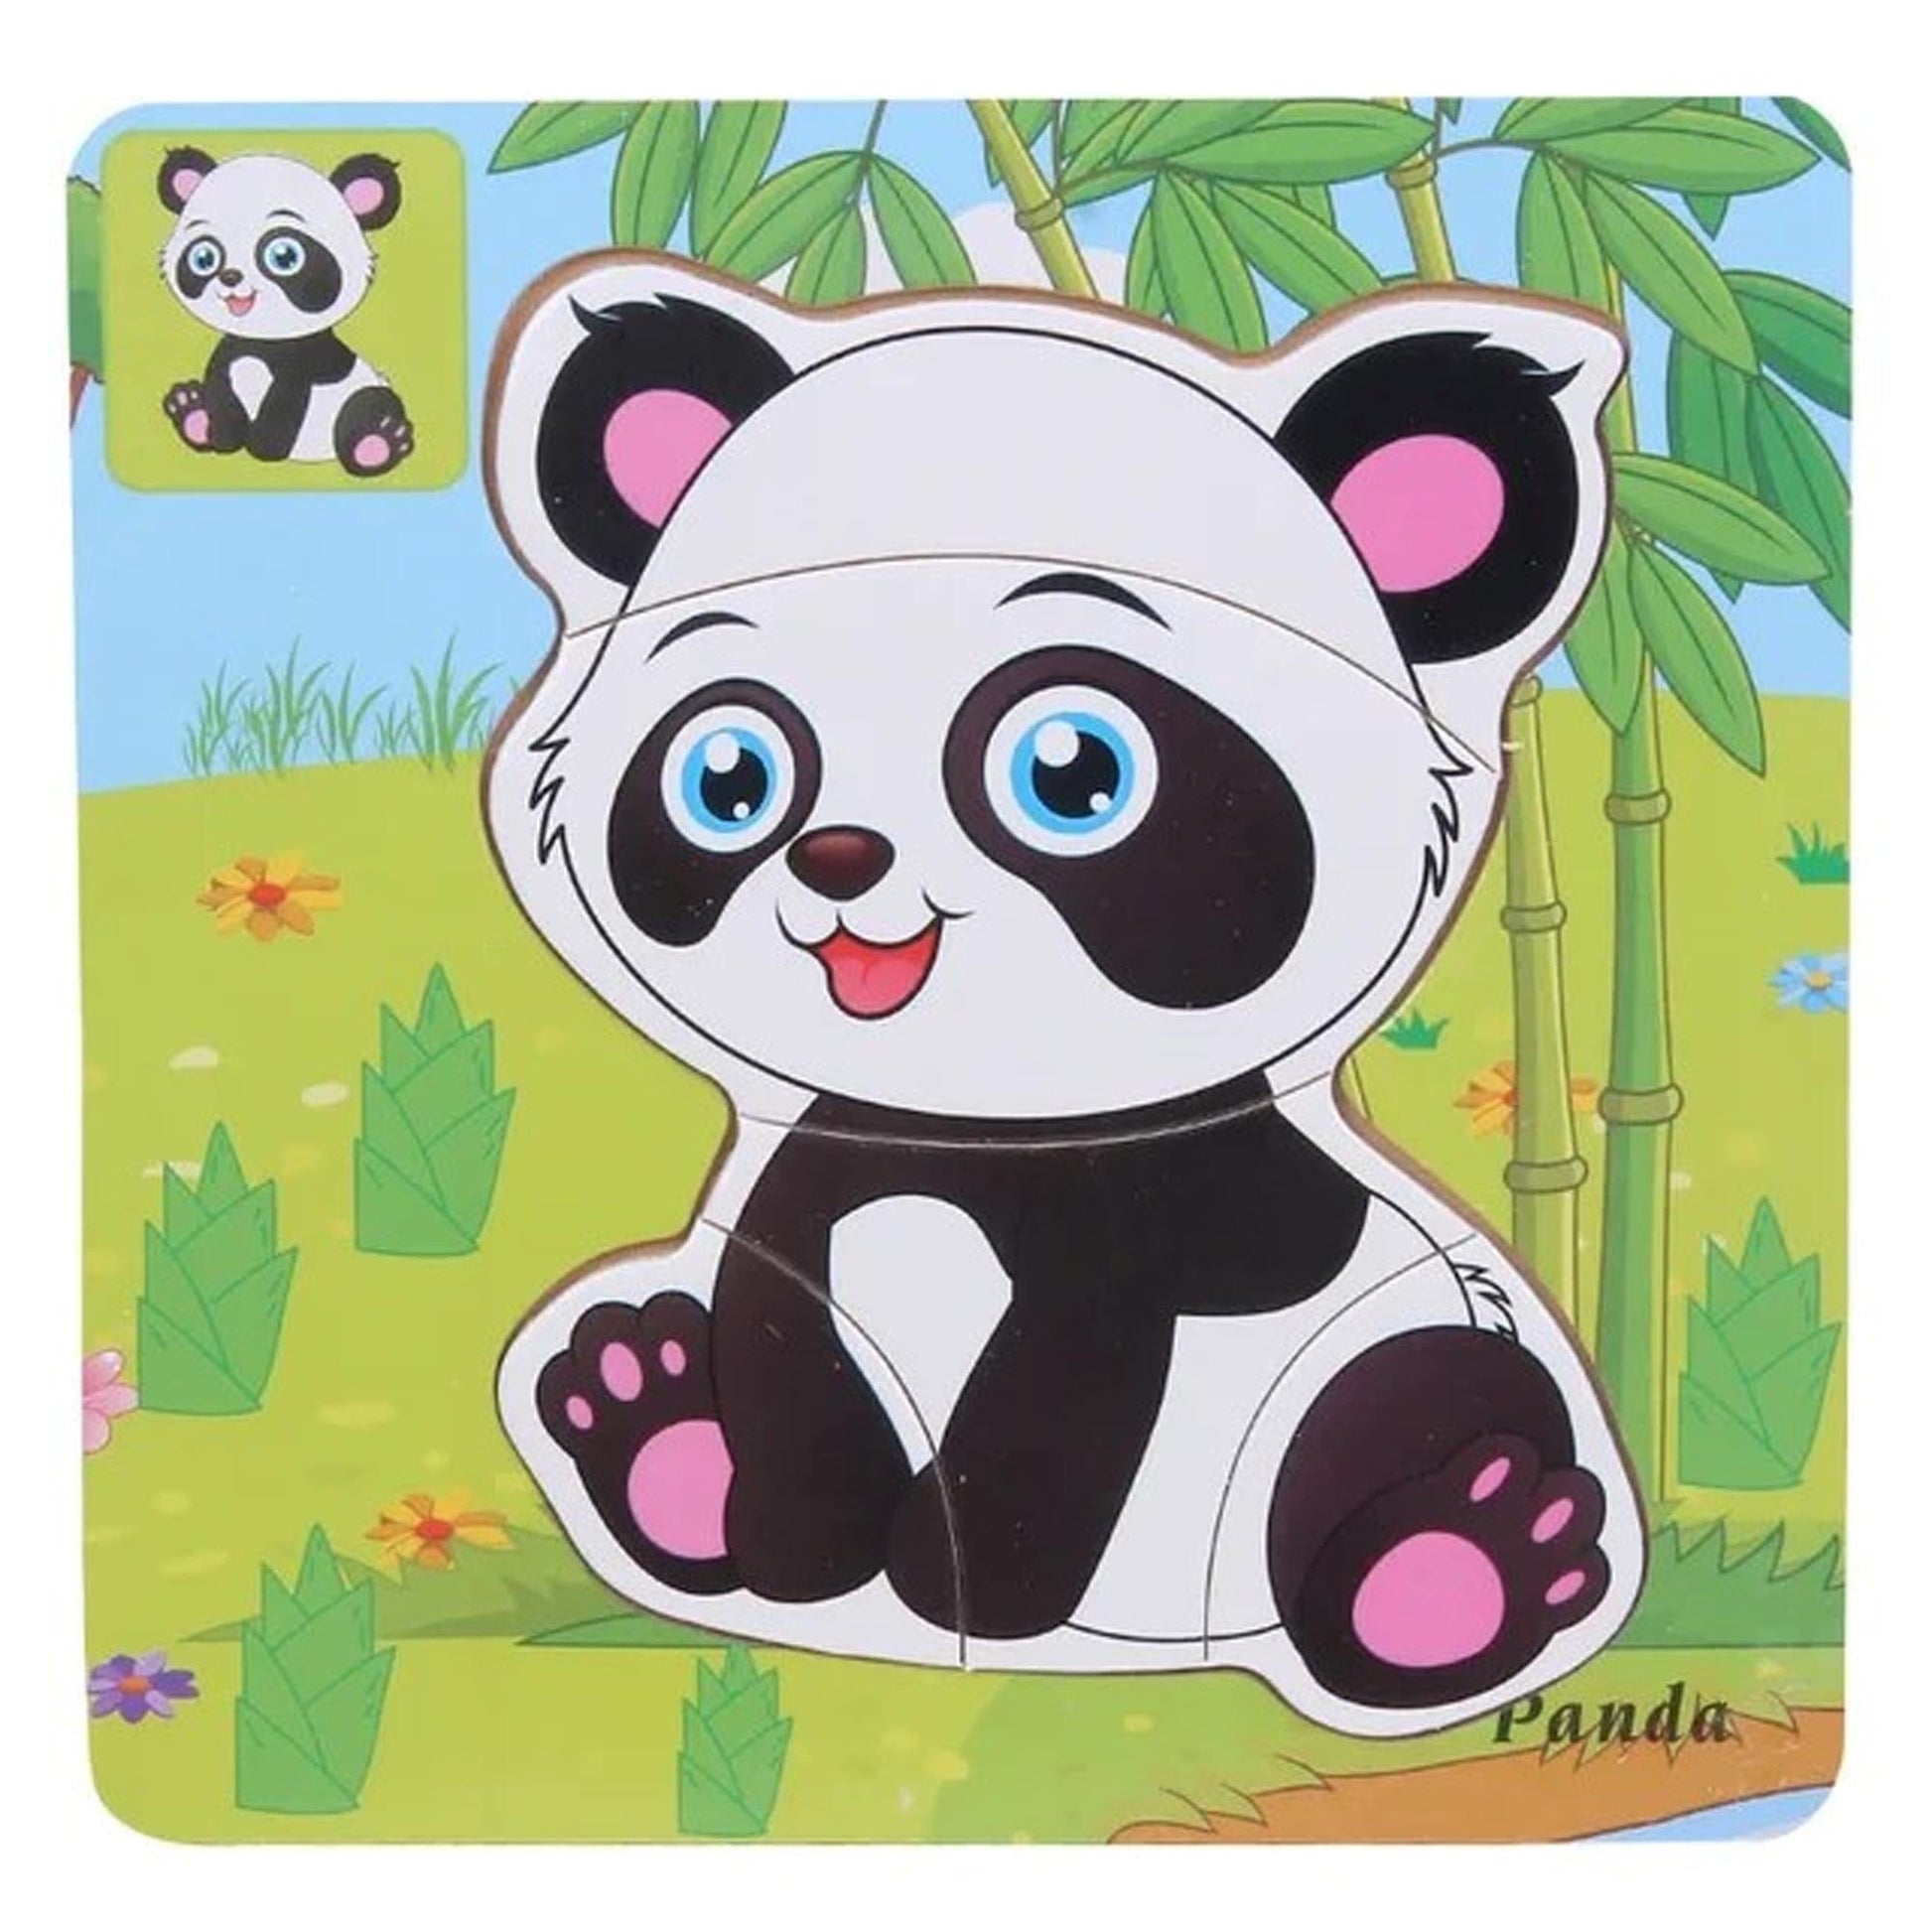 Kid's Multi Purpose Wooden Puzzle Board Toy Toy SRL Panda 